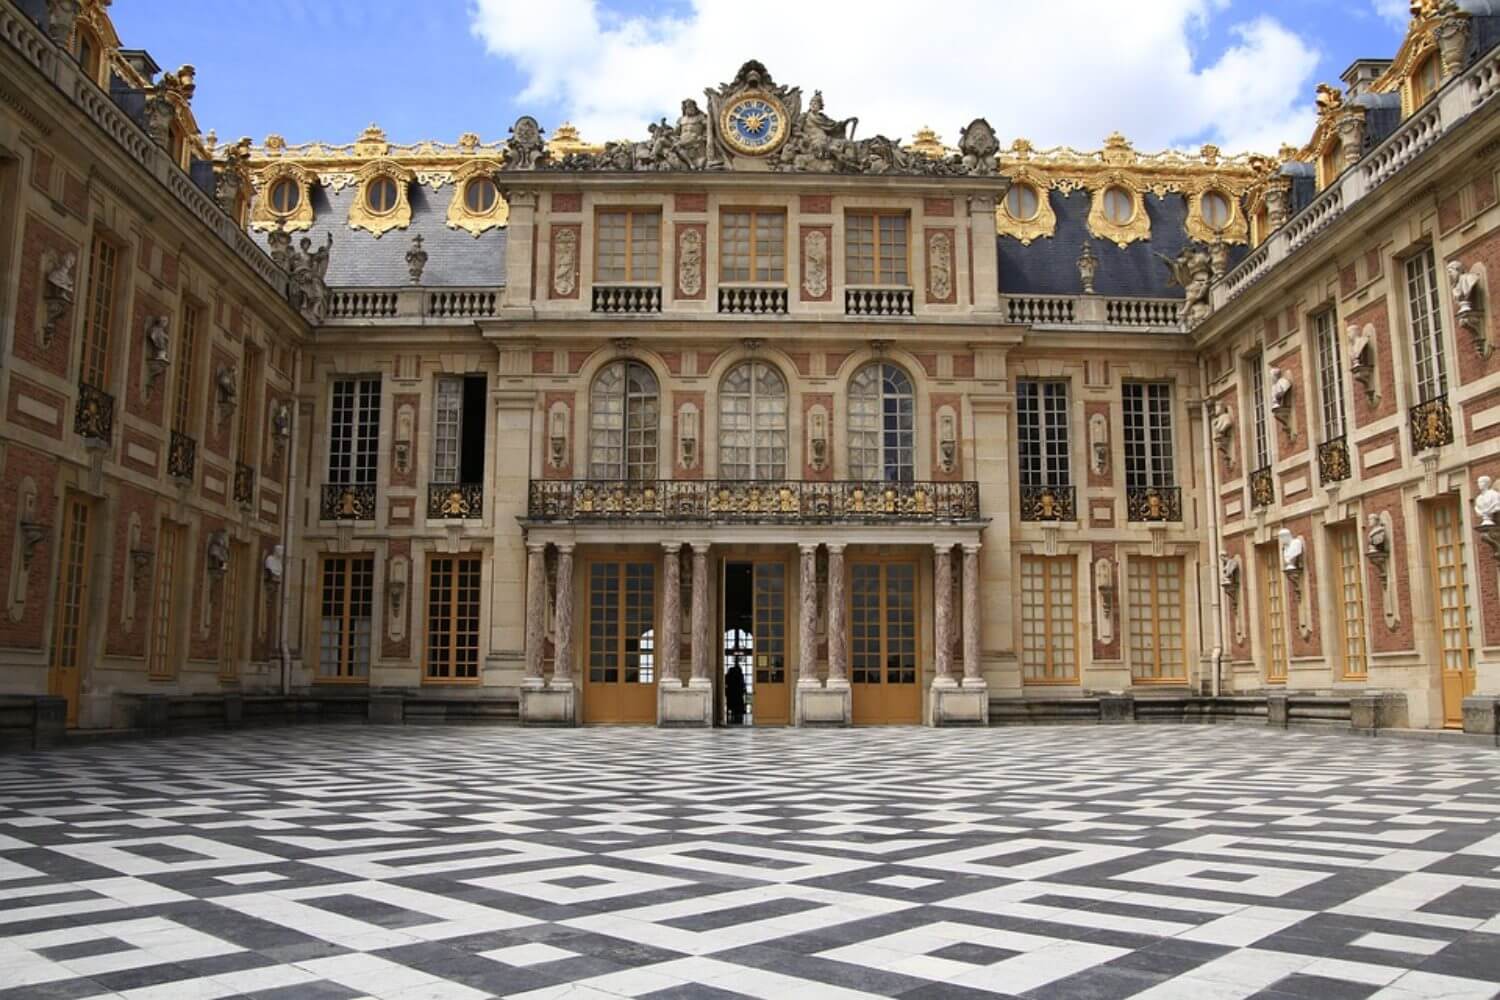 Discovering the most beautiful castles in the world of cinema: Château de Versailles - Image by AdamKinnwall from Pixabay